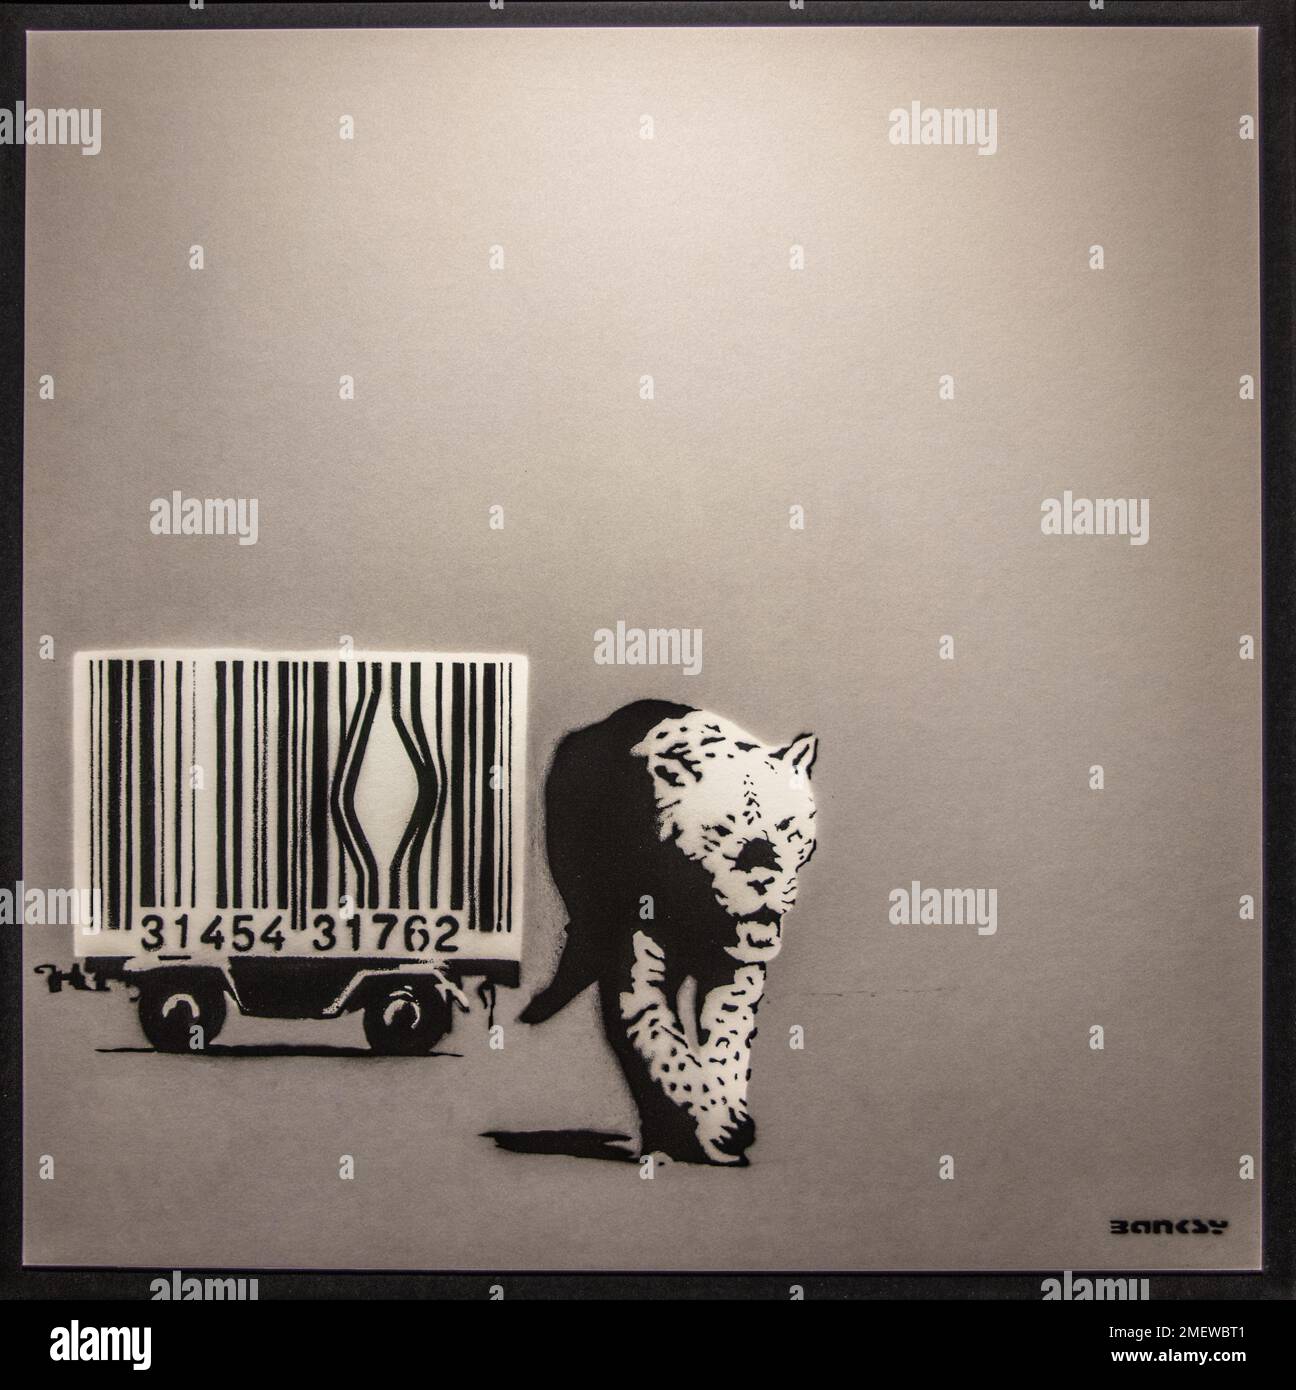 Barcode Leopard, barcode stands metaphorically for bars of the animal transporters, 2001, Banksy, exhibition about the street artist, Muelheim Stock Photo